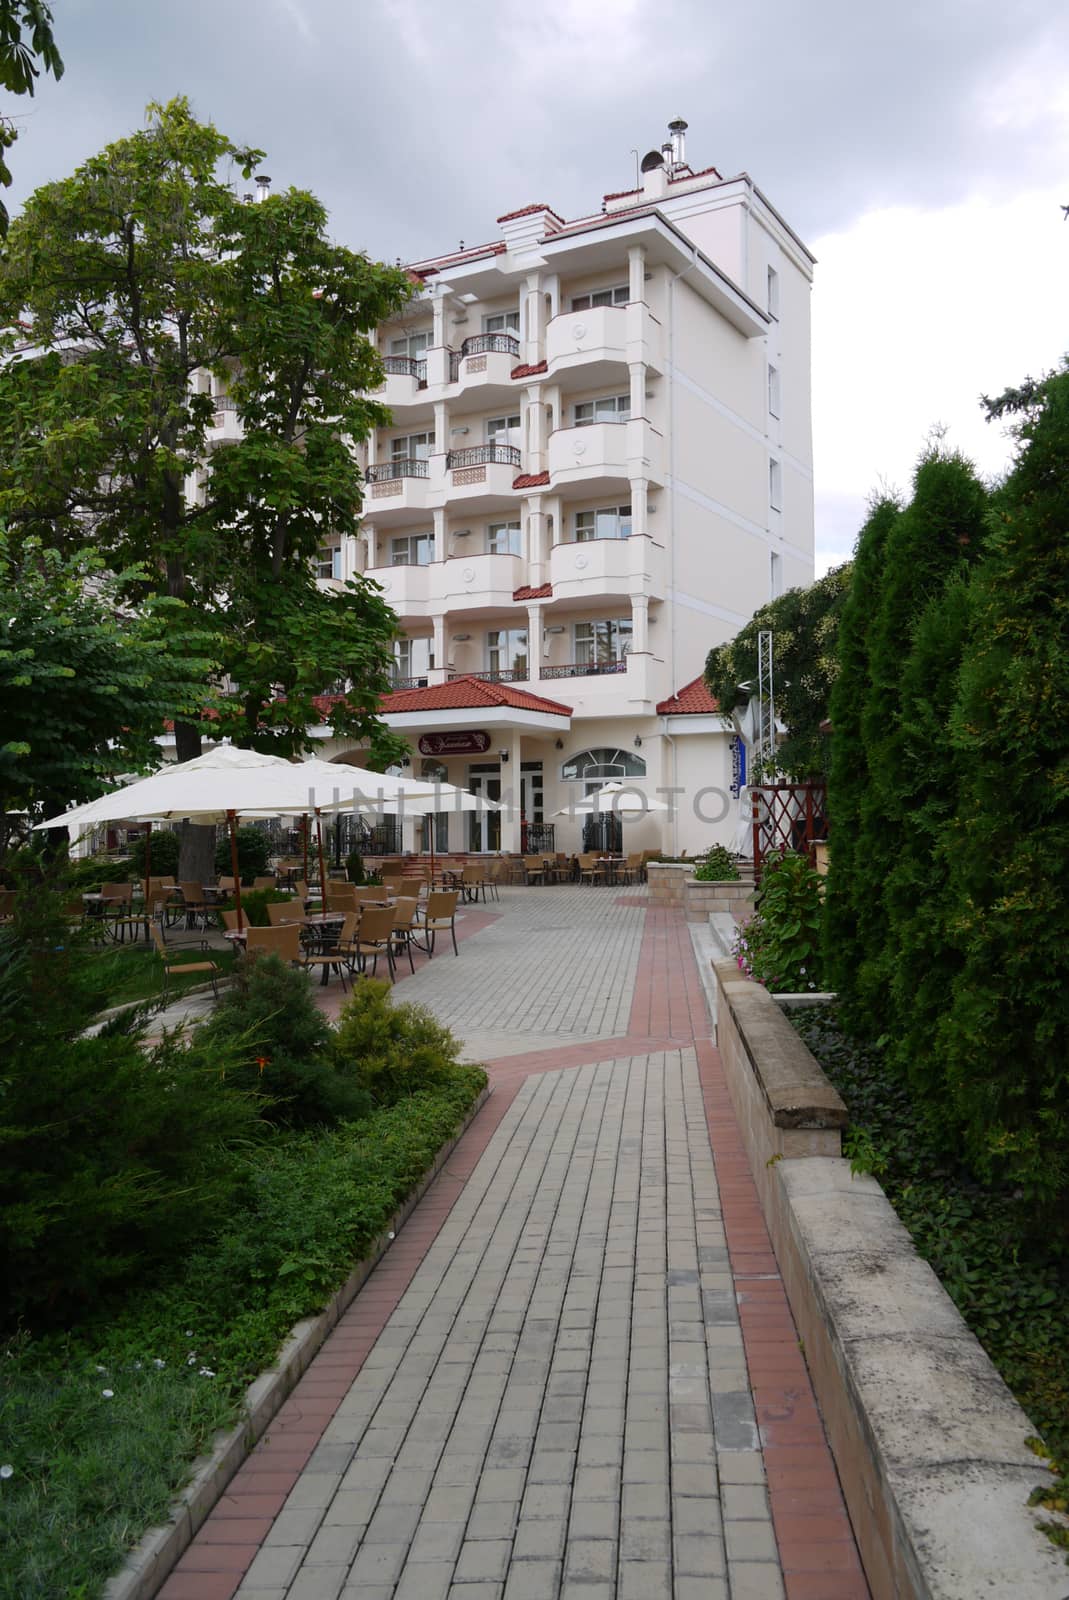 The path running between green bushes and lawn leads to the hotel with balconies with tables and chairs standing next to it for tourists on the street.